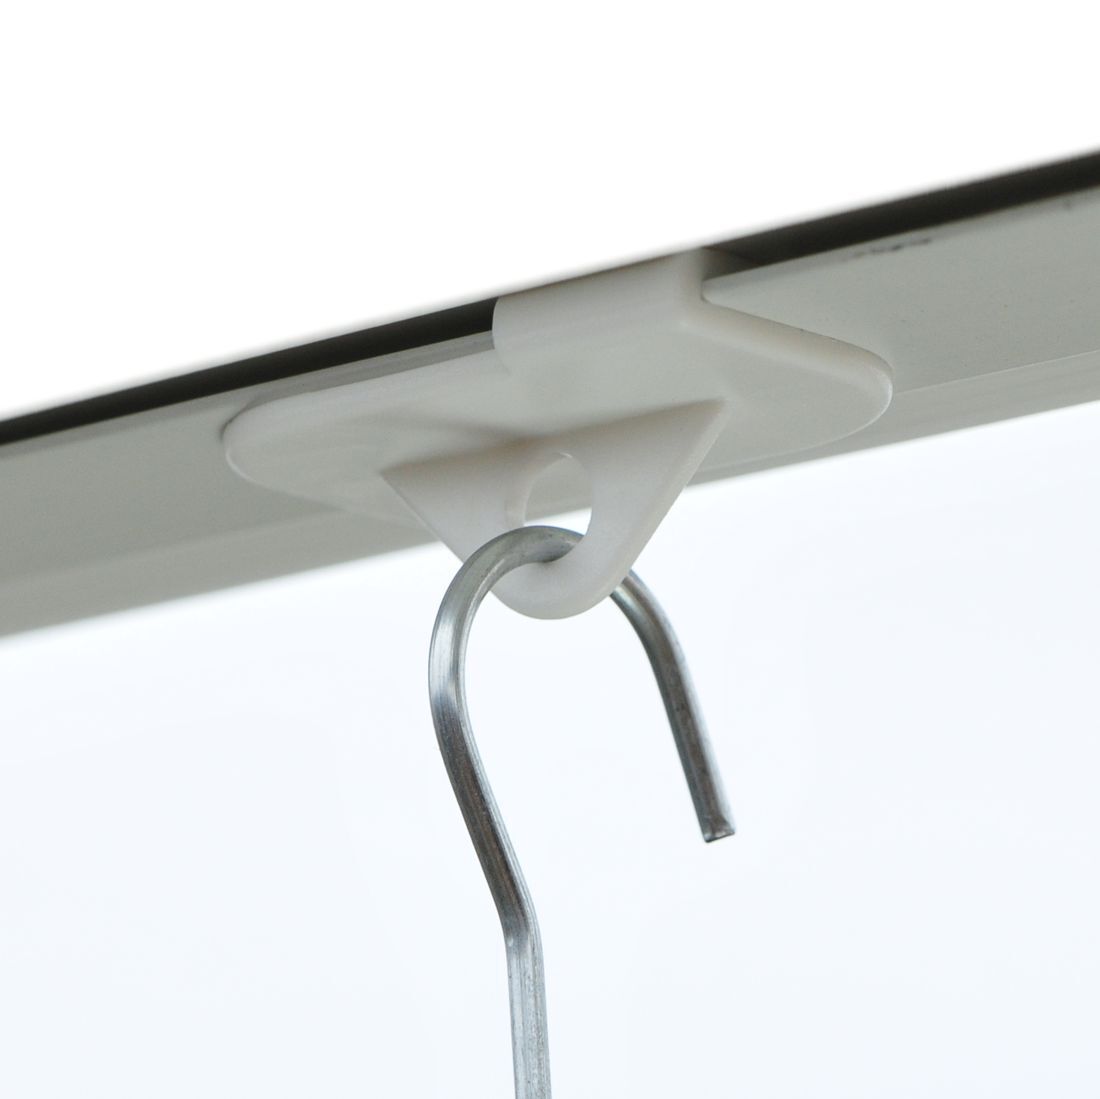 Ceiling grid clips for attaching to suspended ceilings